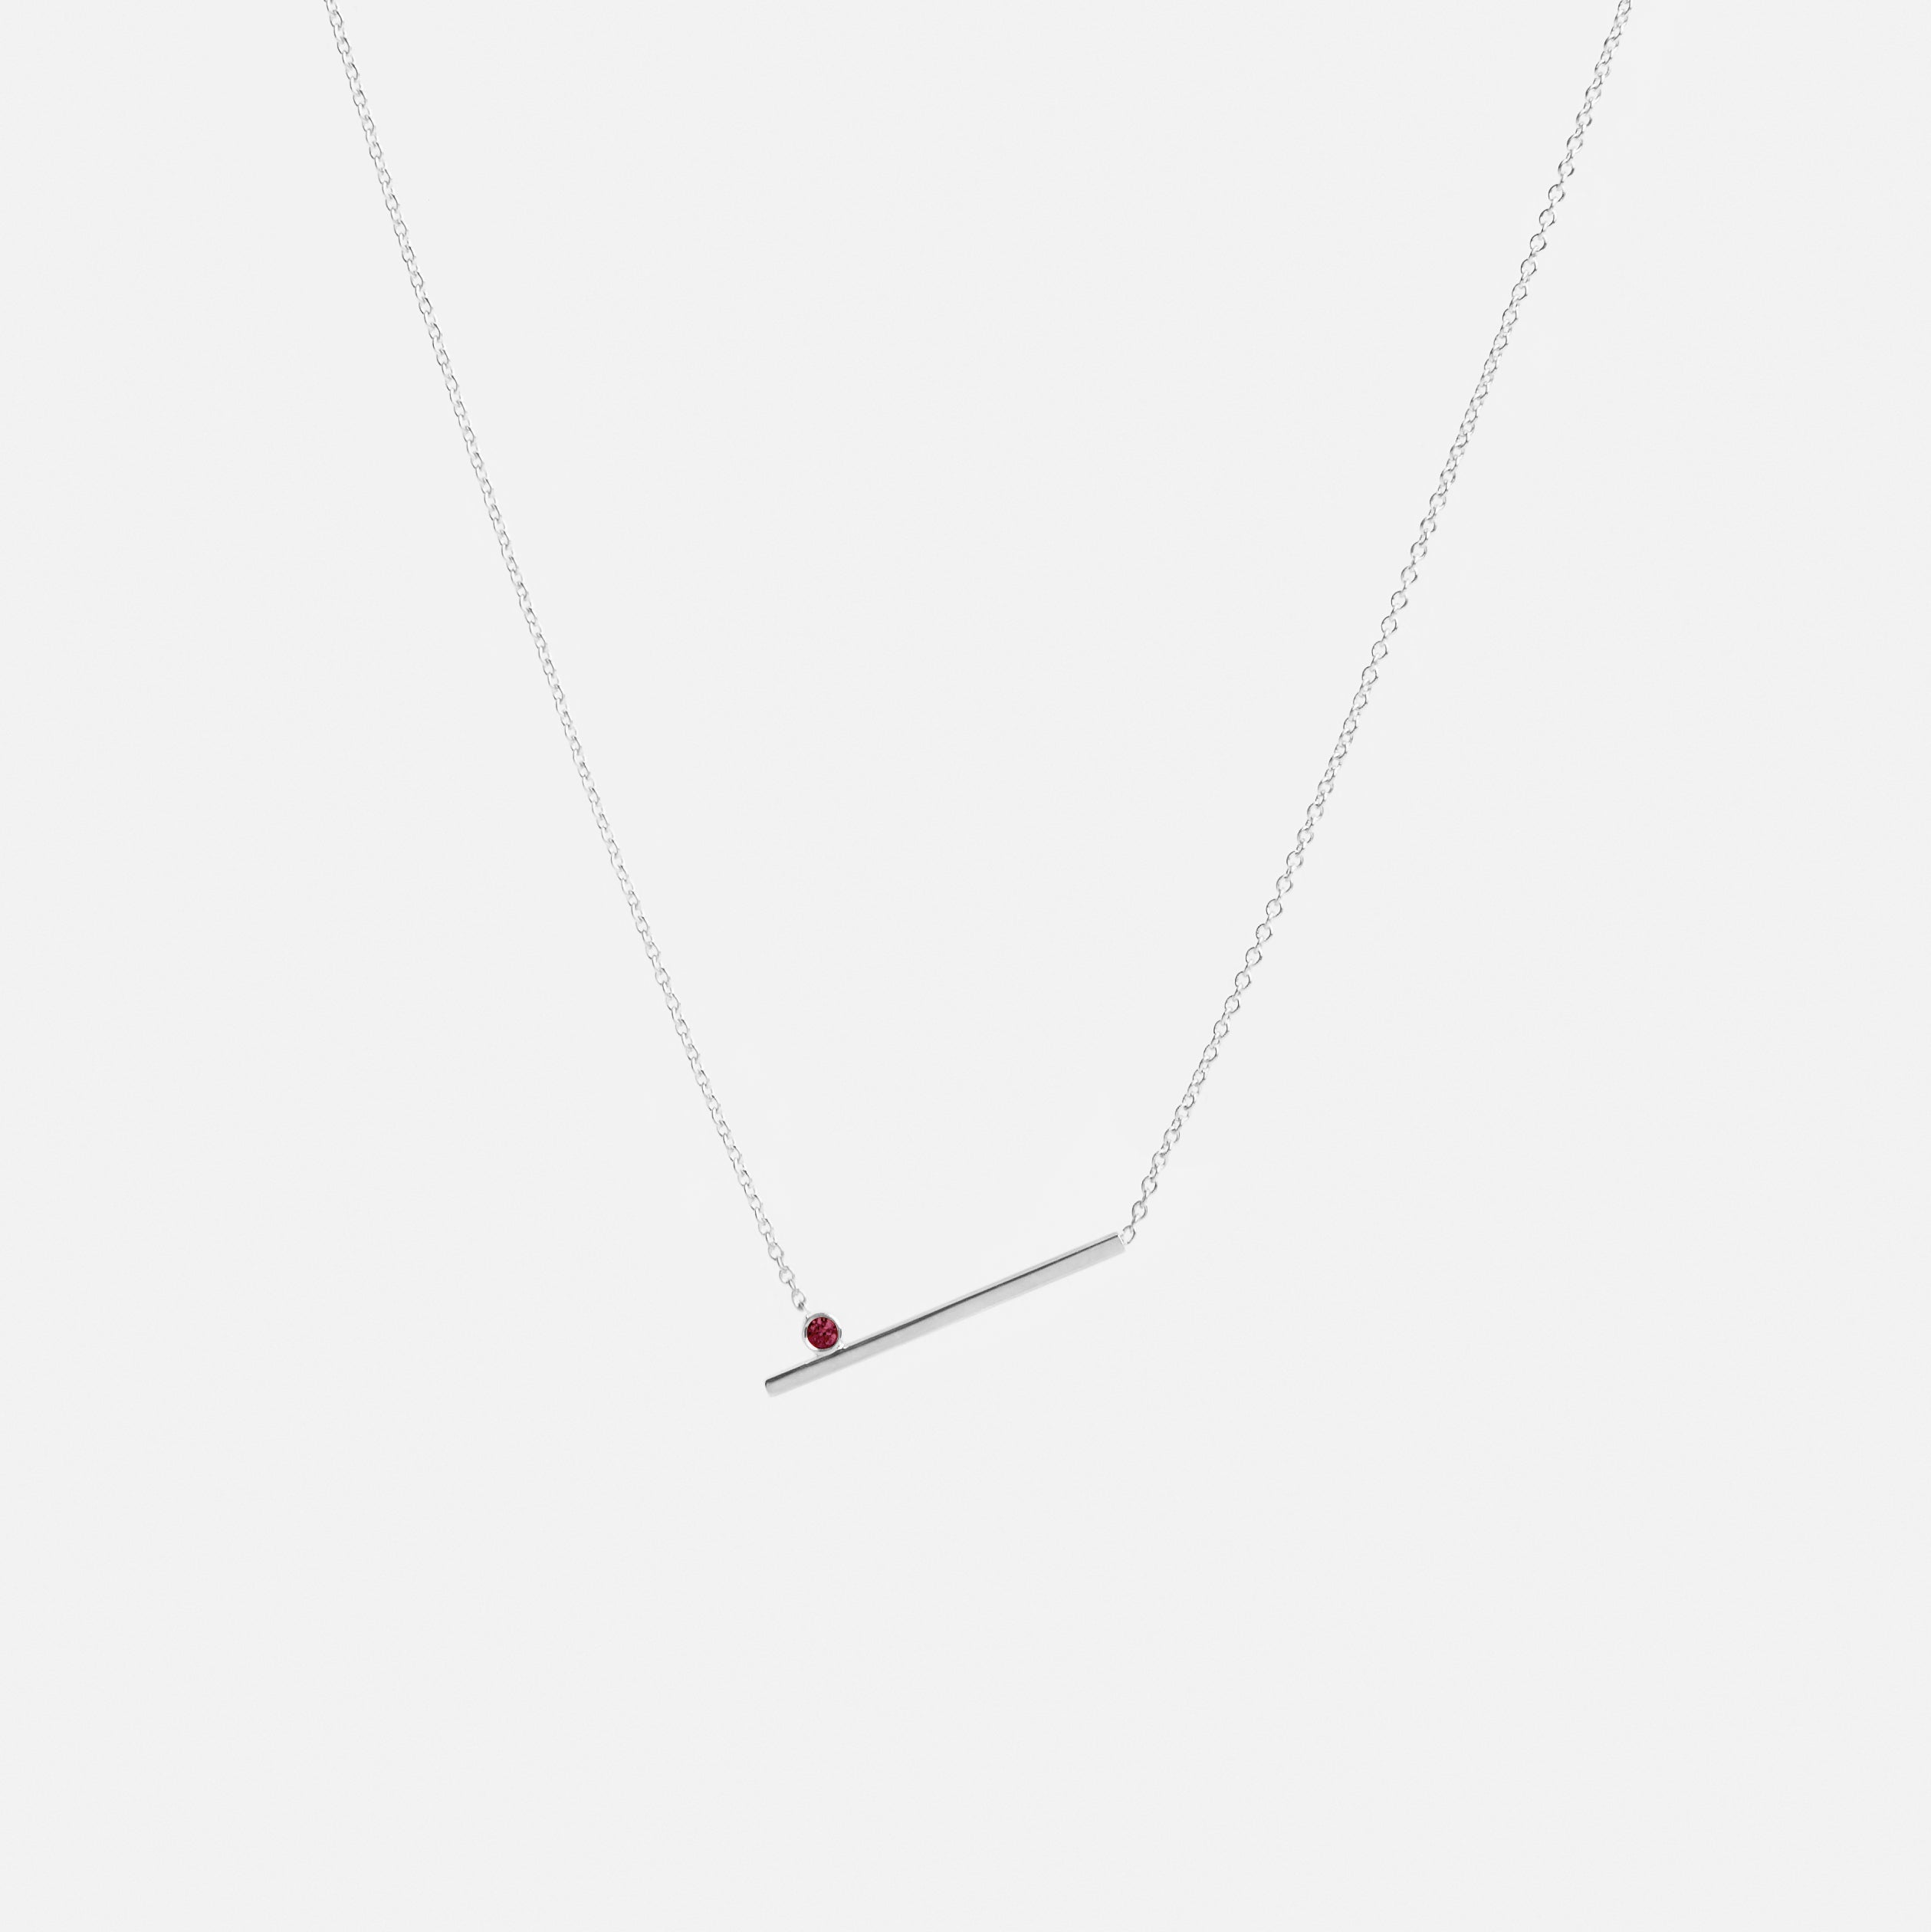 Livi Unconventional Necklace in 14k White Gold Set with Ruby By SHW Fine Jewelry NYC